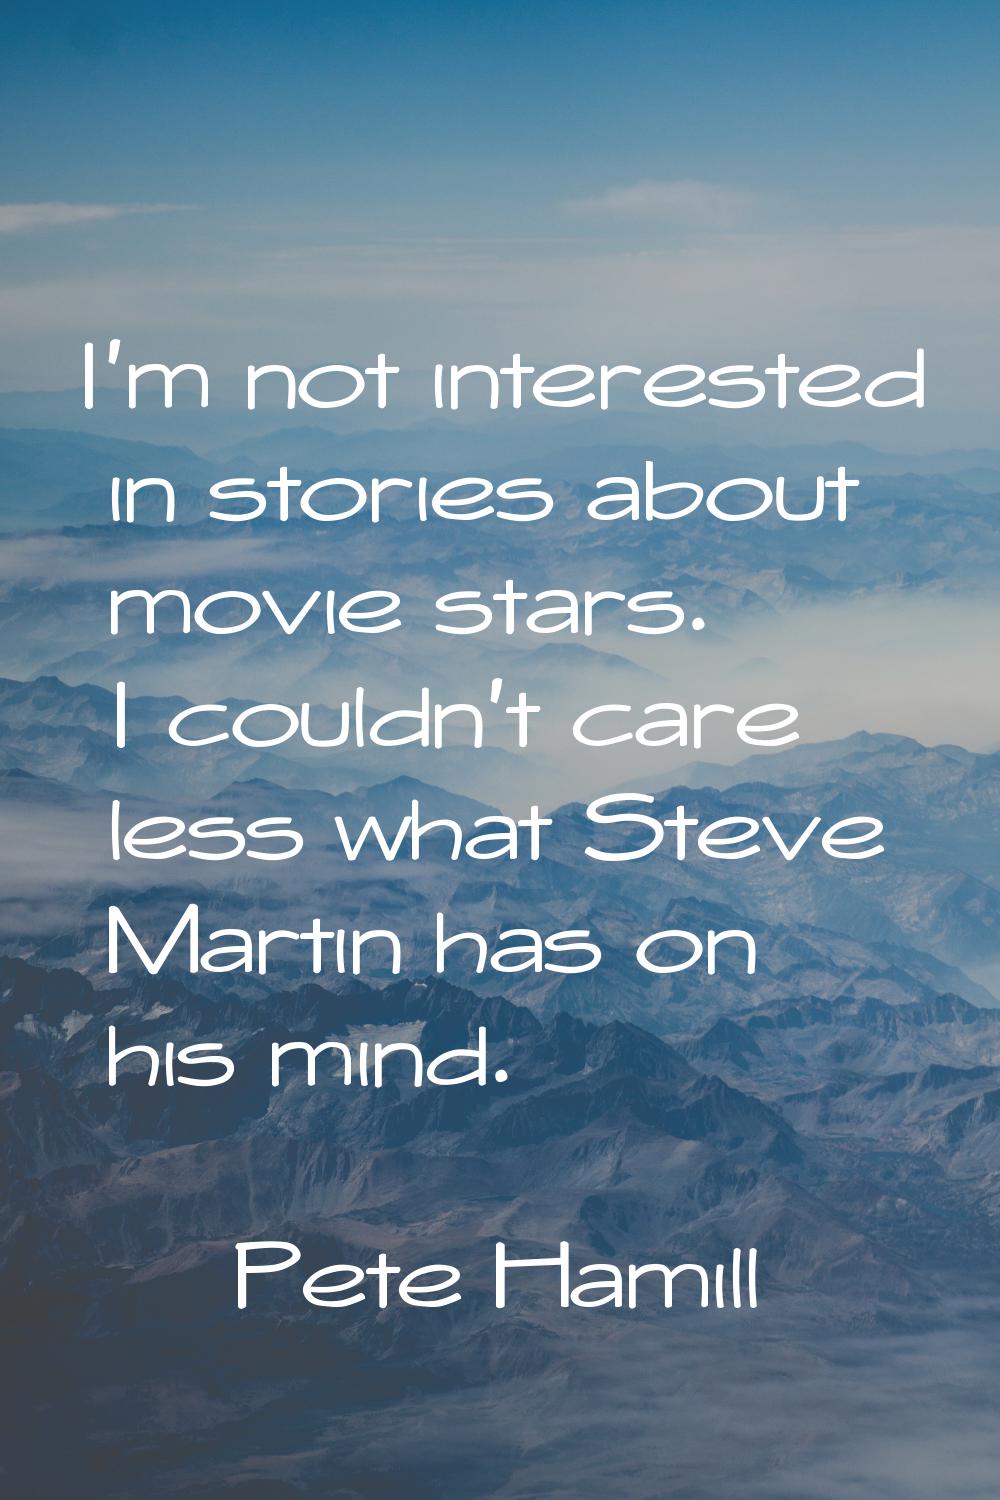 I'm not interested in stories about movie stars. I couldn't care less what Steve Martin has on his 